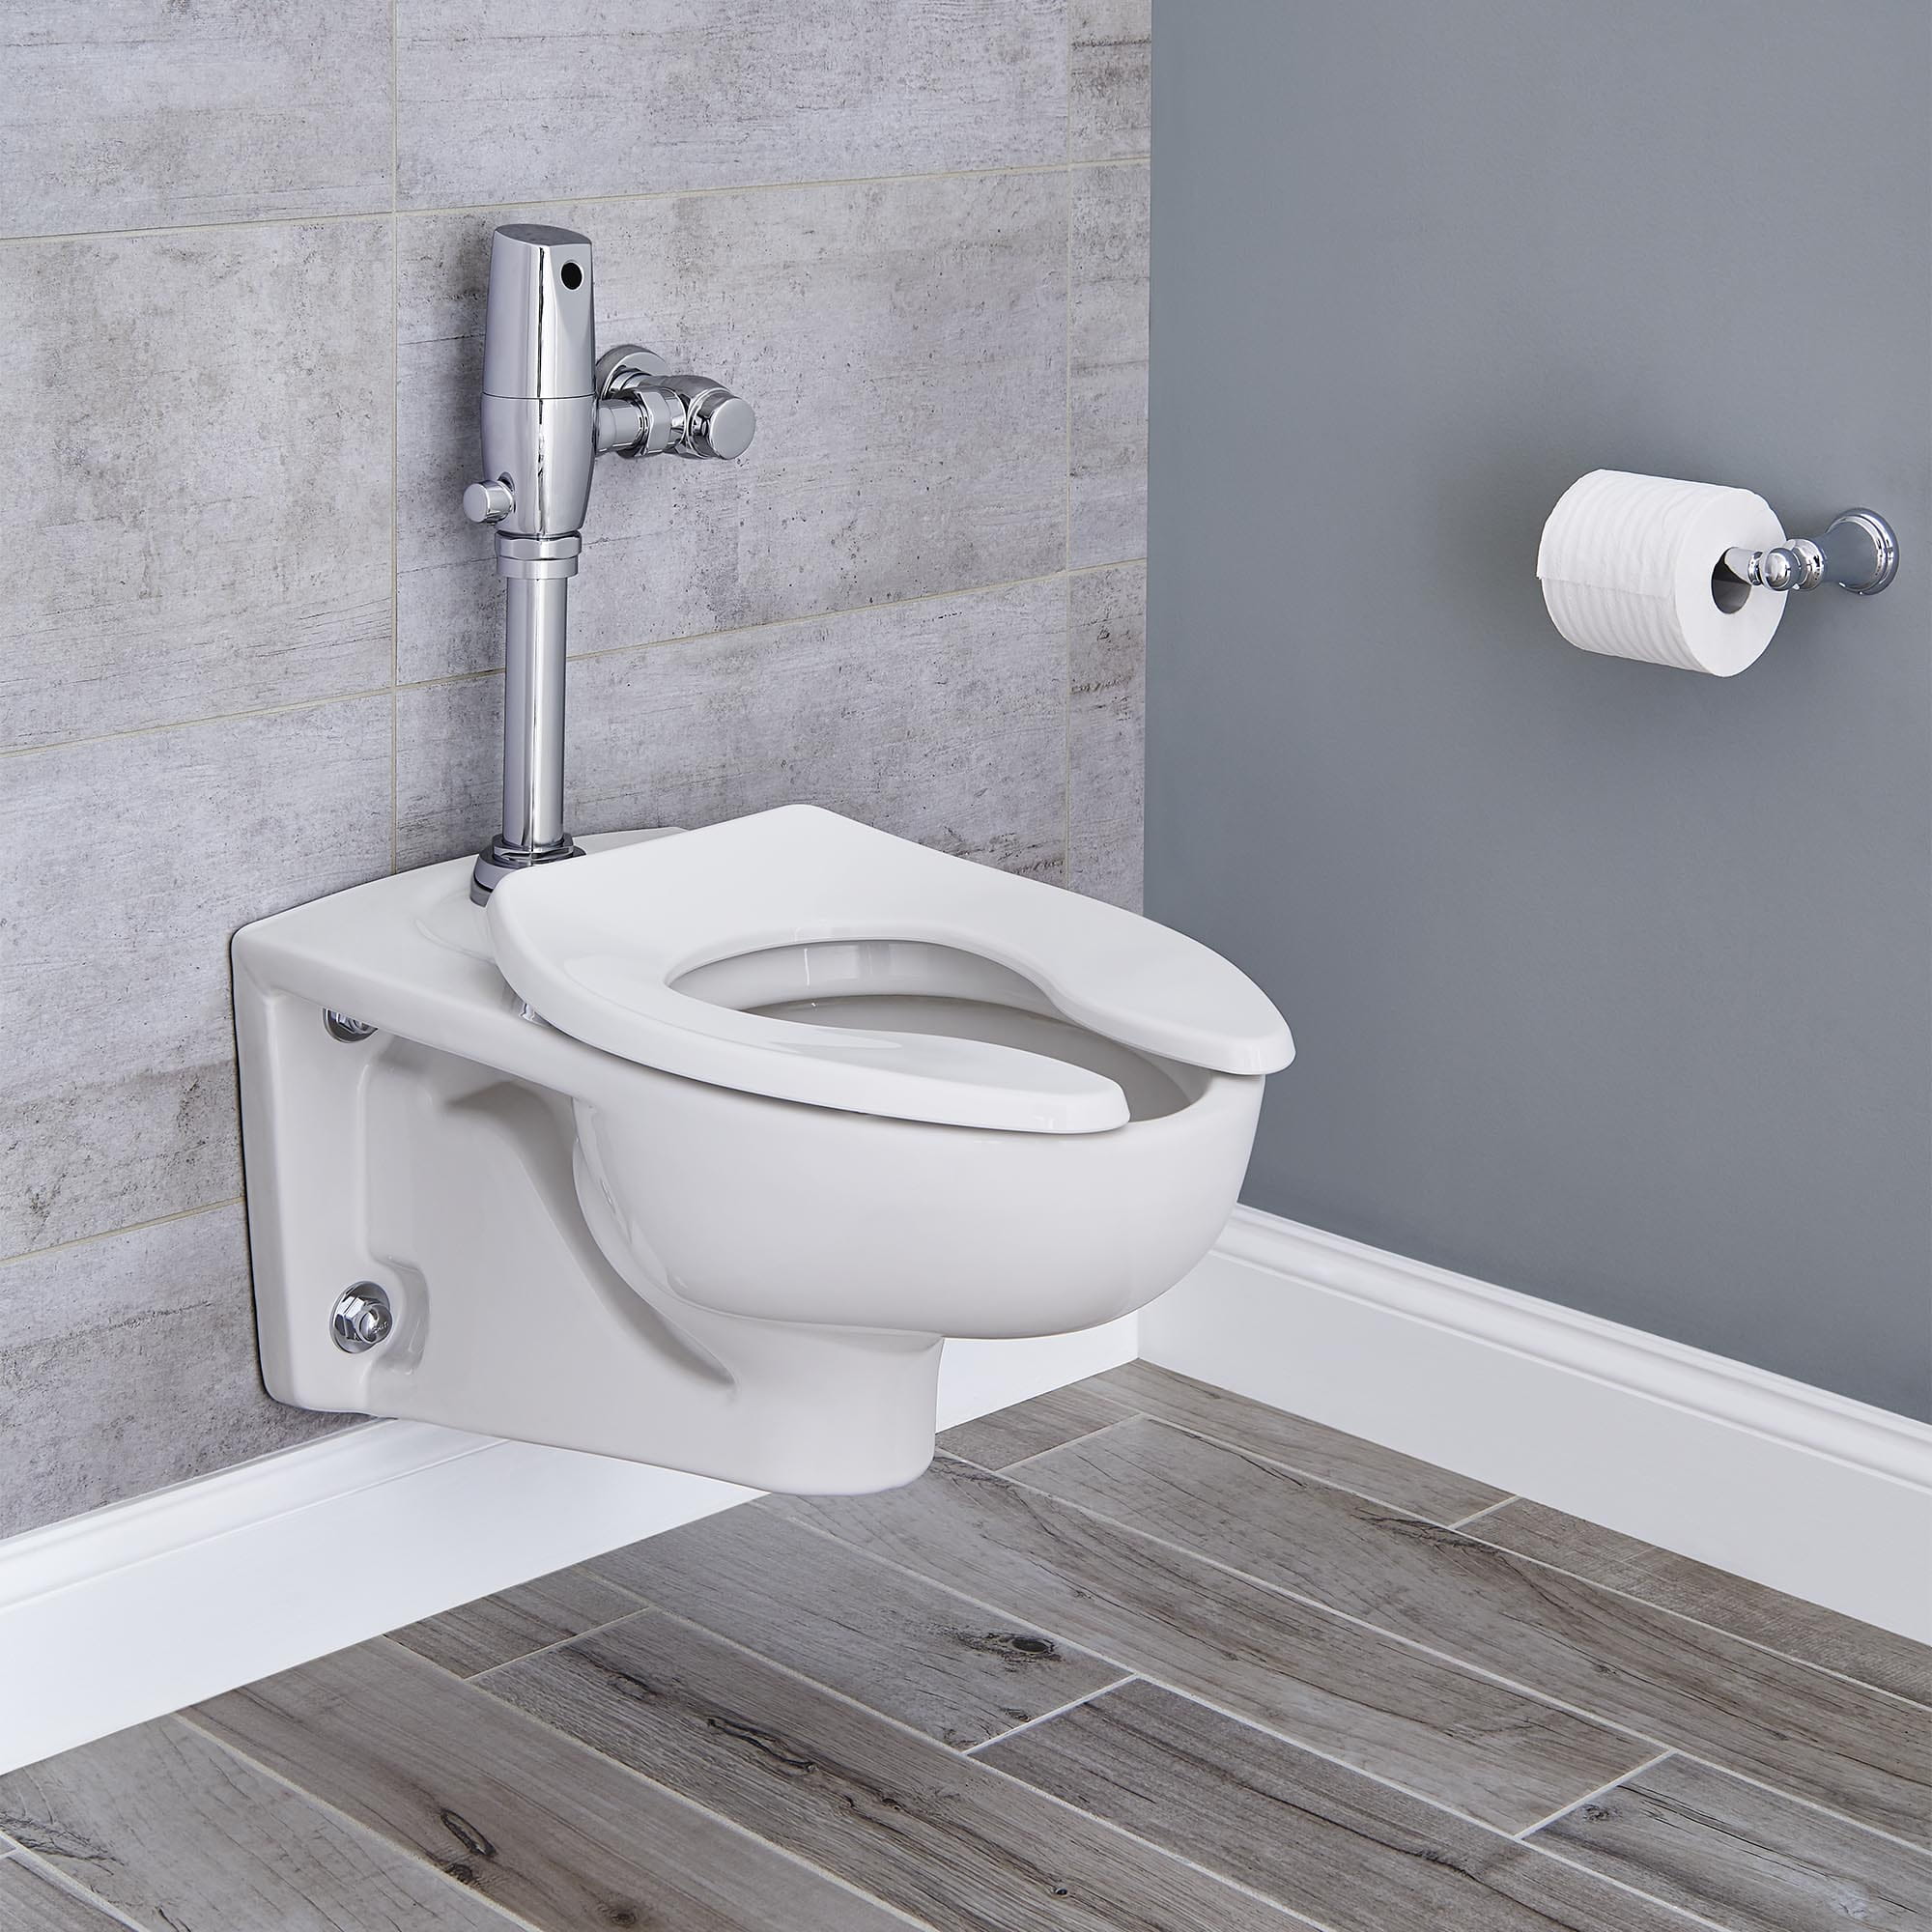 Afwall® Millennium® Wall-Hung Toilet System With Touchless Selectronic® Piston Flush Valve, 1.1 gpf/4.2 Lpf